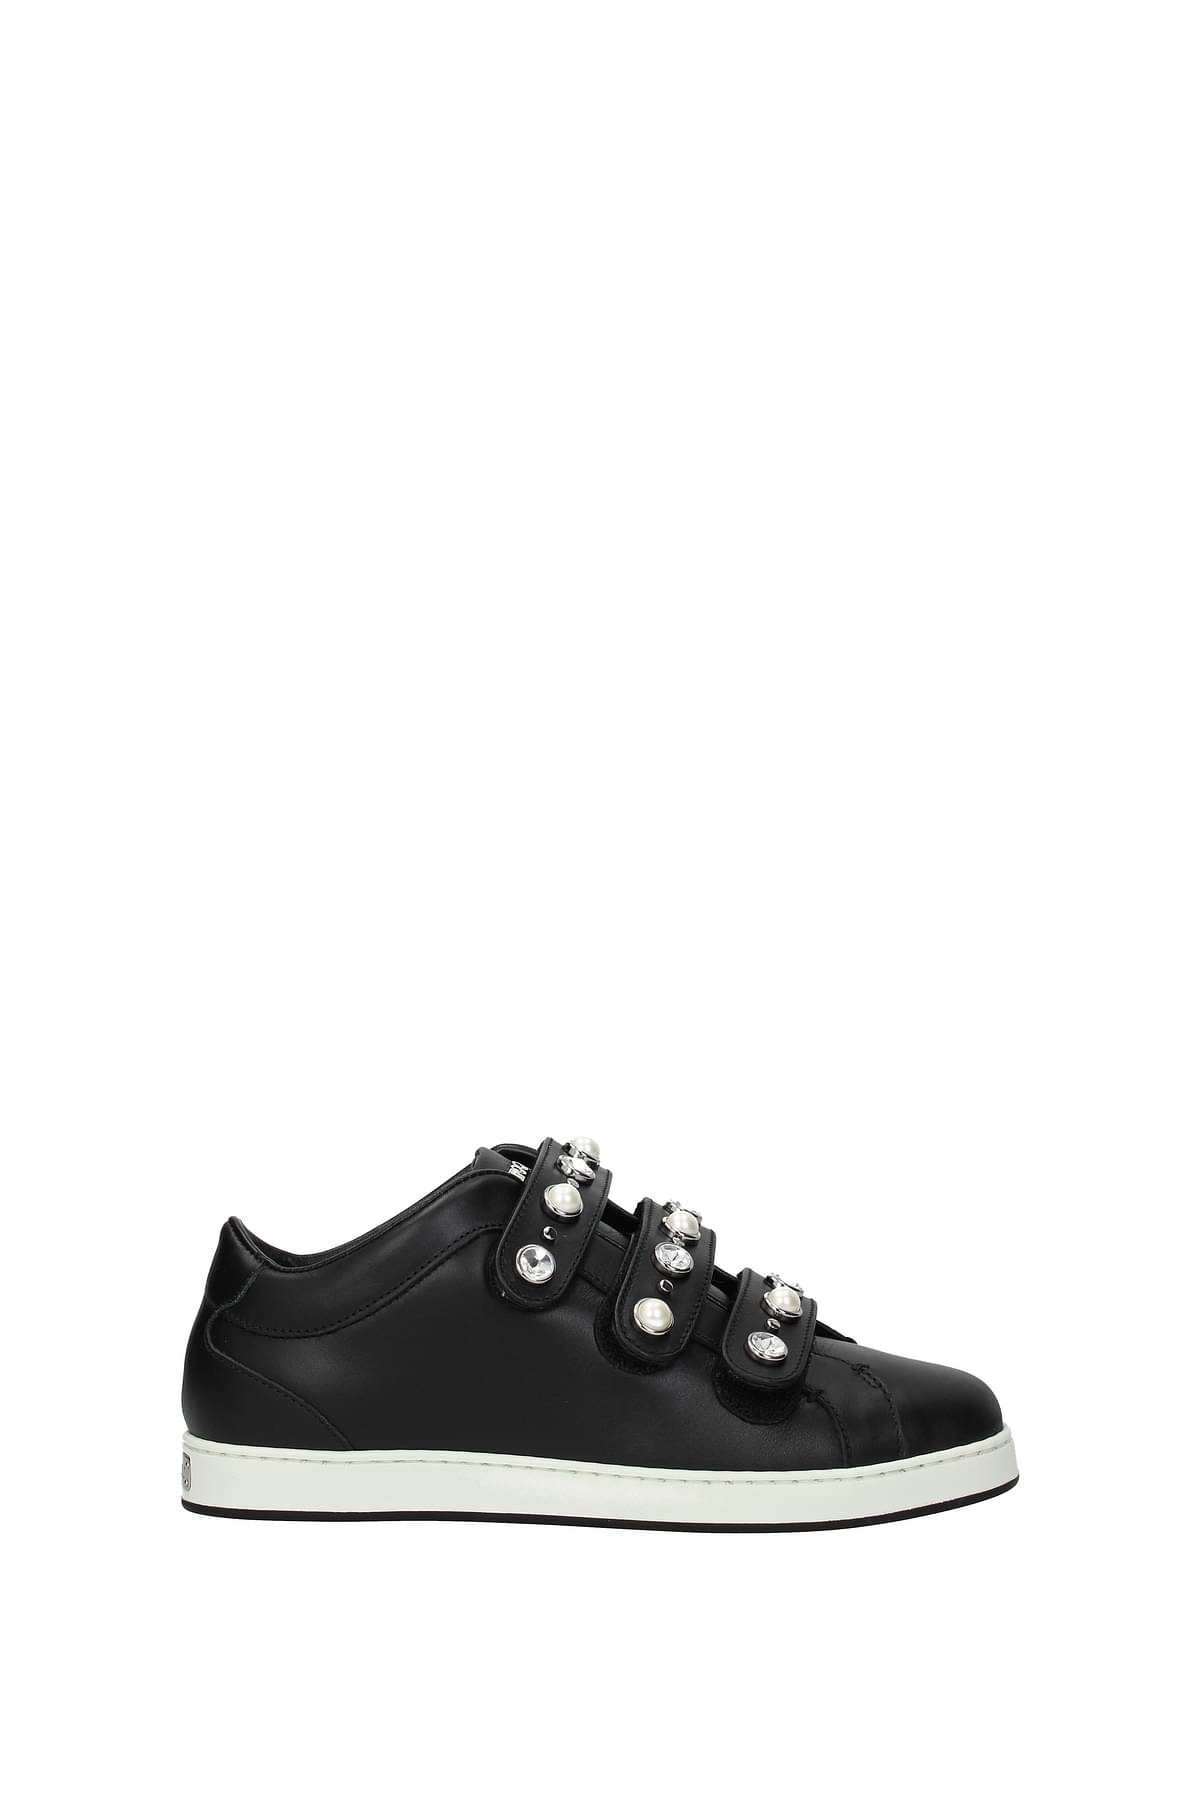 syre alligevel At deaktivere Jimmy Choo Sneakers Women NYCYNBLACKMIX Leather 364,88€